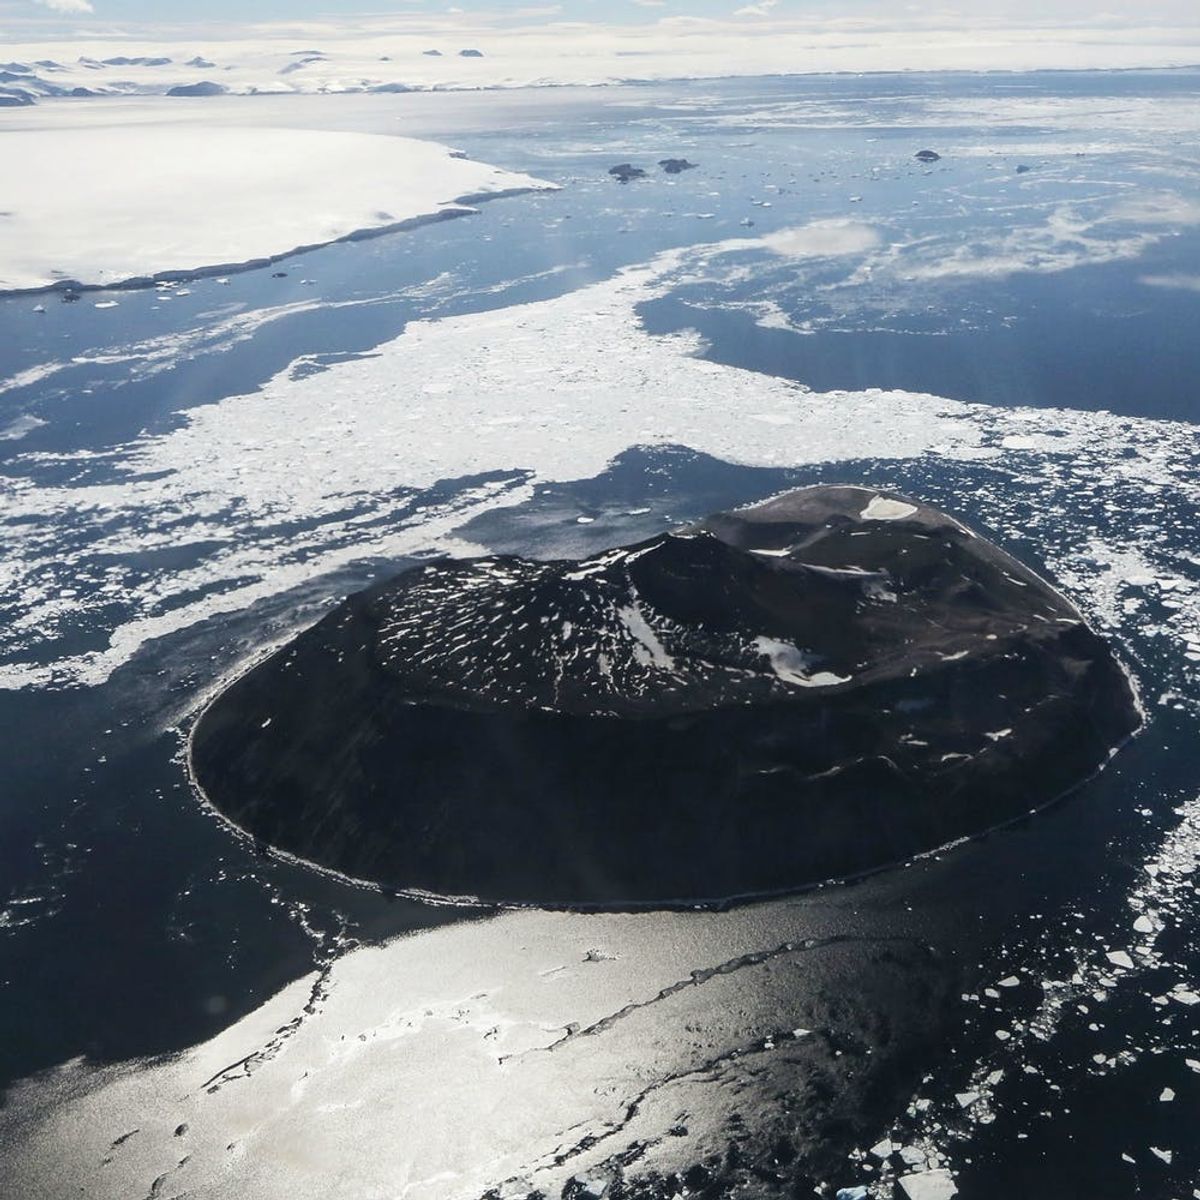 So Much of Antarctica’s Ice Has Melted in the Past Decade That Scientists Are Freaking Out